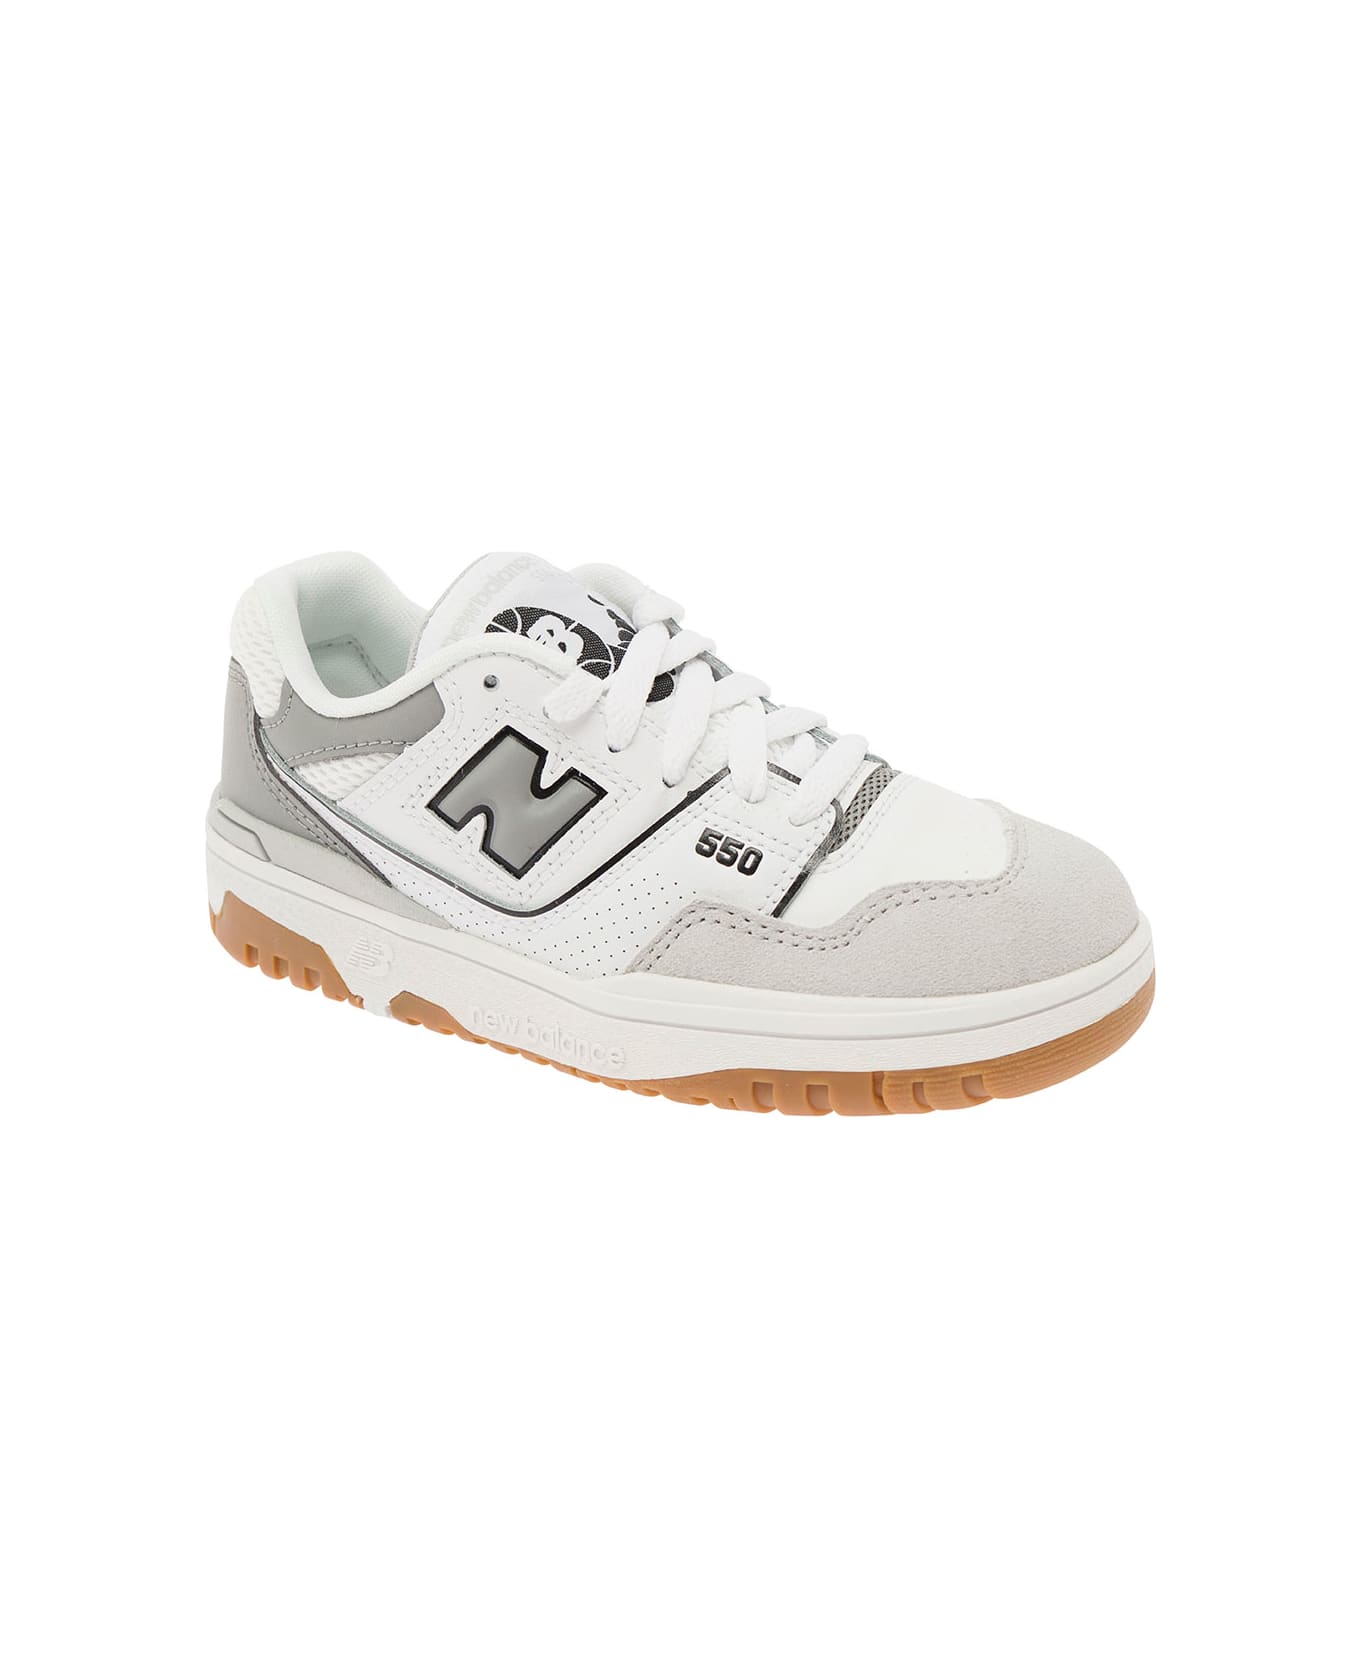 New Balance '550' White And Grey Sneakers With Side Logo And Suede Inserts In Leather Boy - Grey シューズ